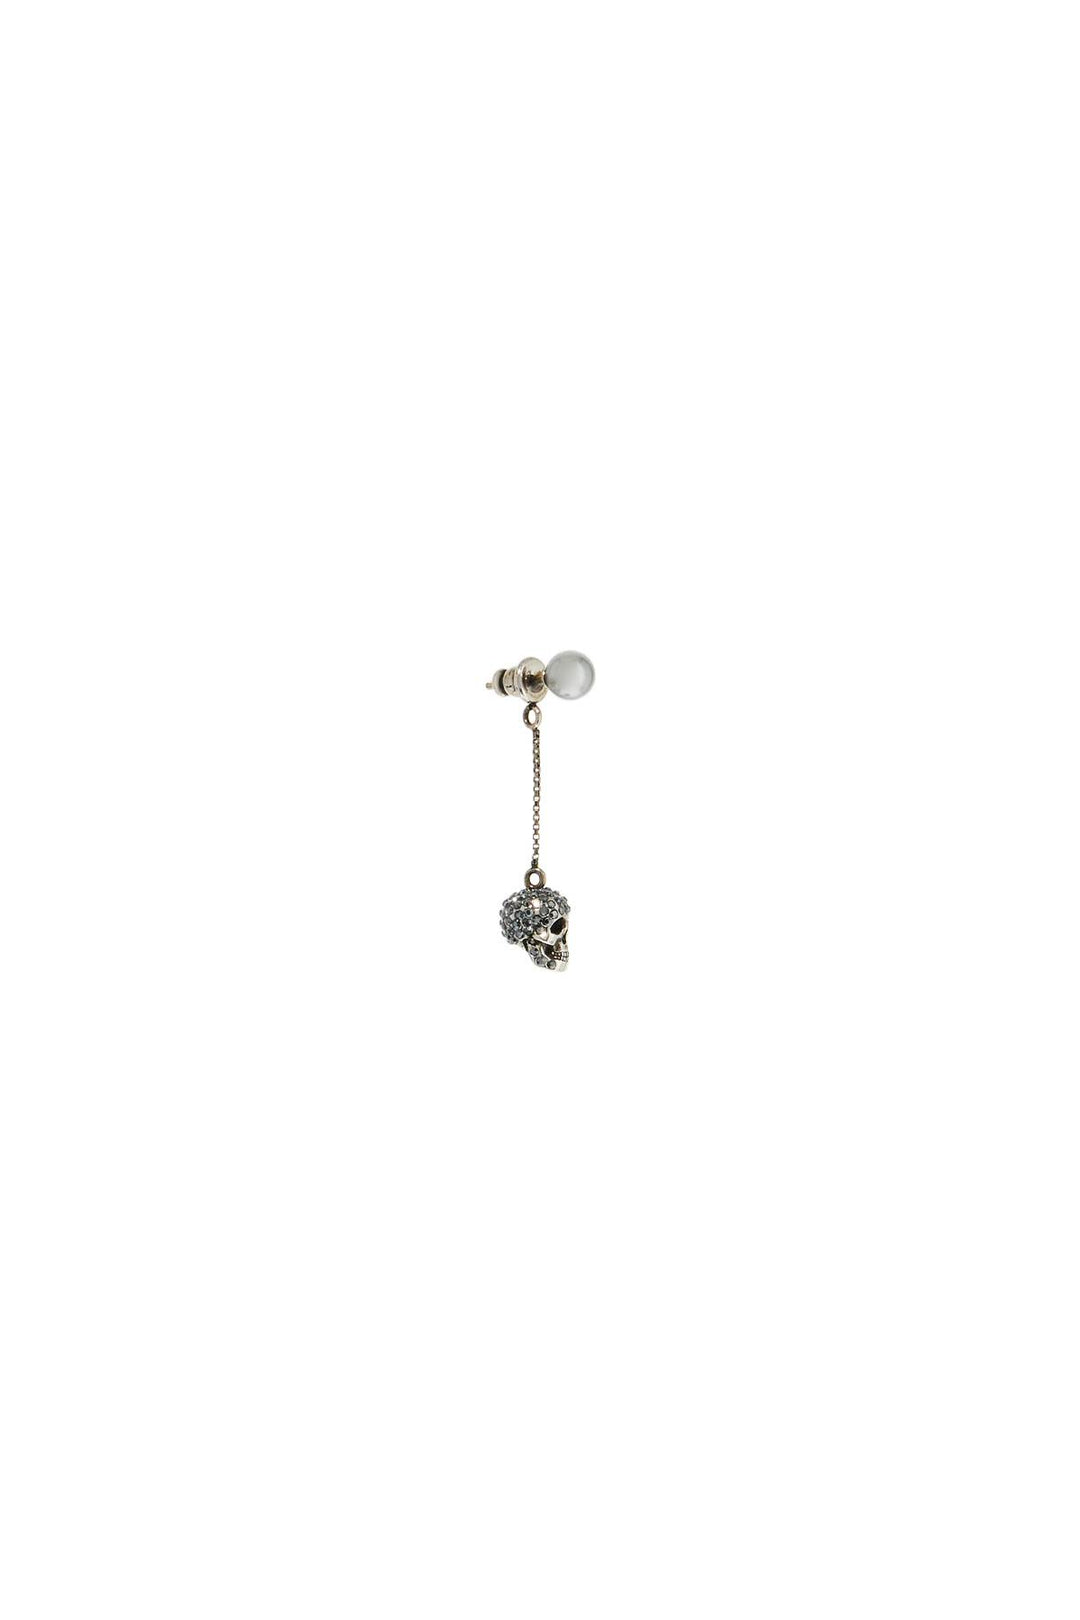 Alexander Mcqueen Skull Earrings With Pavé And Chain   Grey